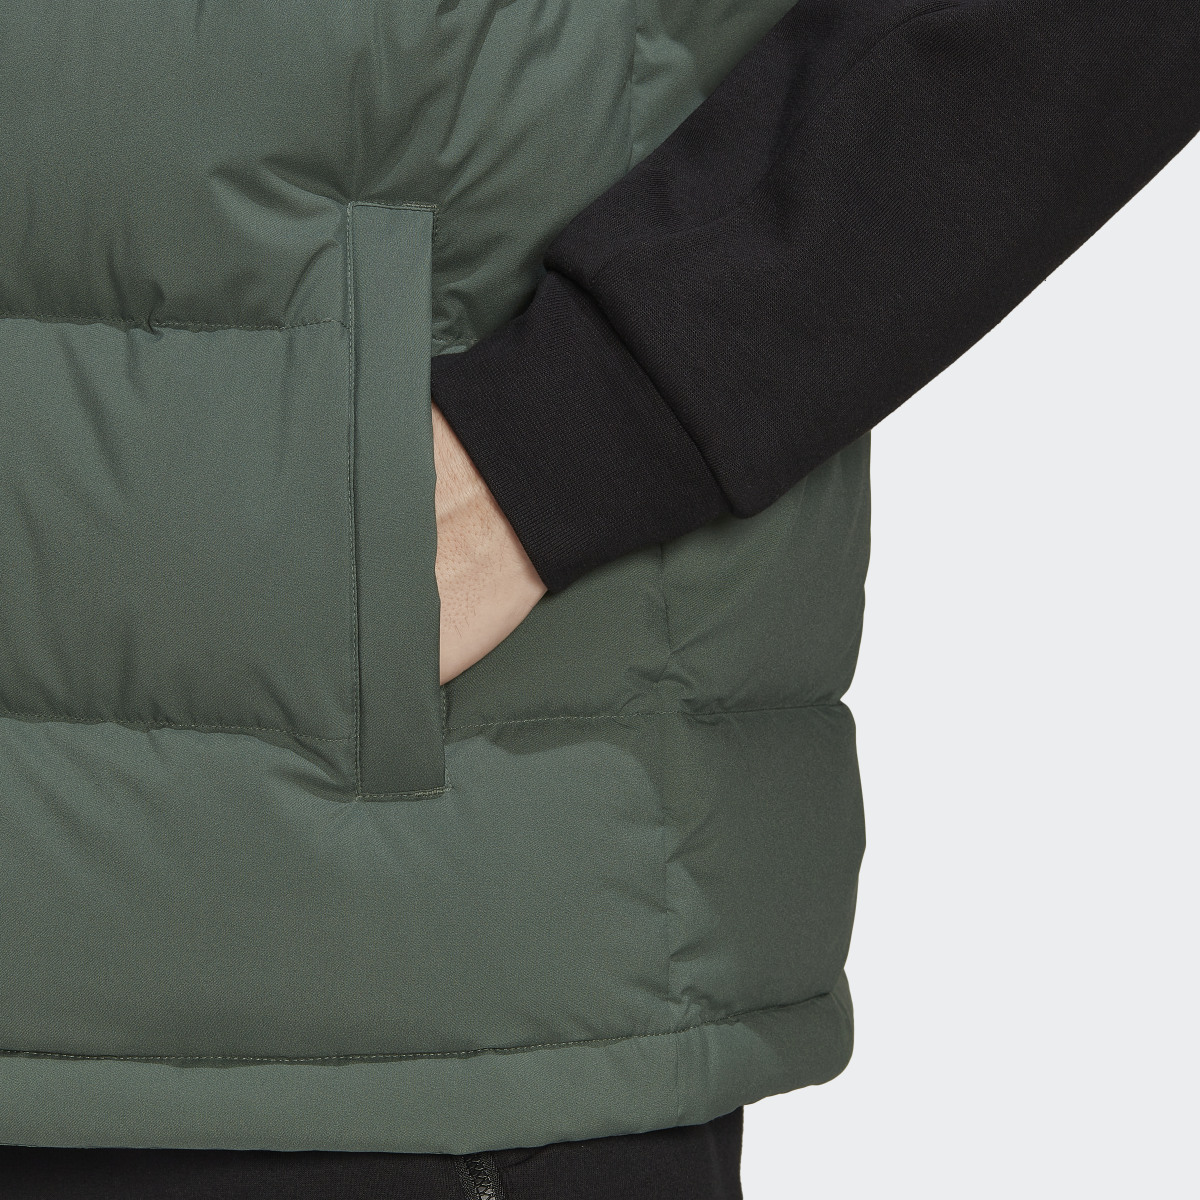 Adidas Helionic Hooded Down Vest. 8